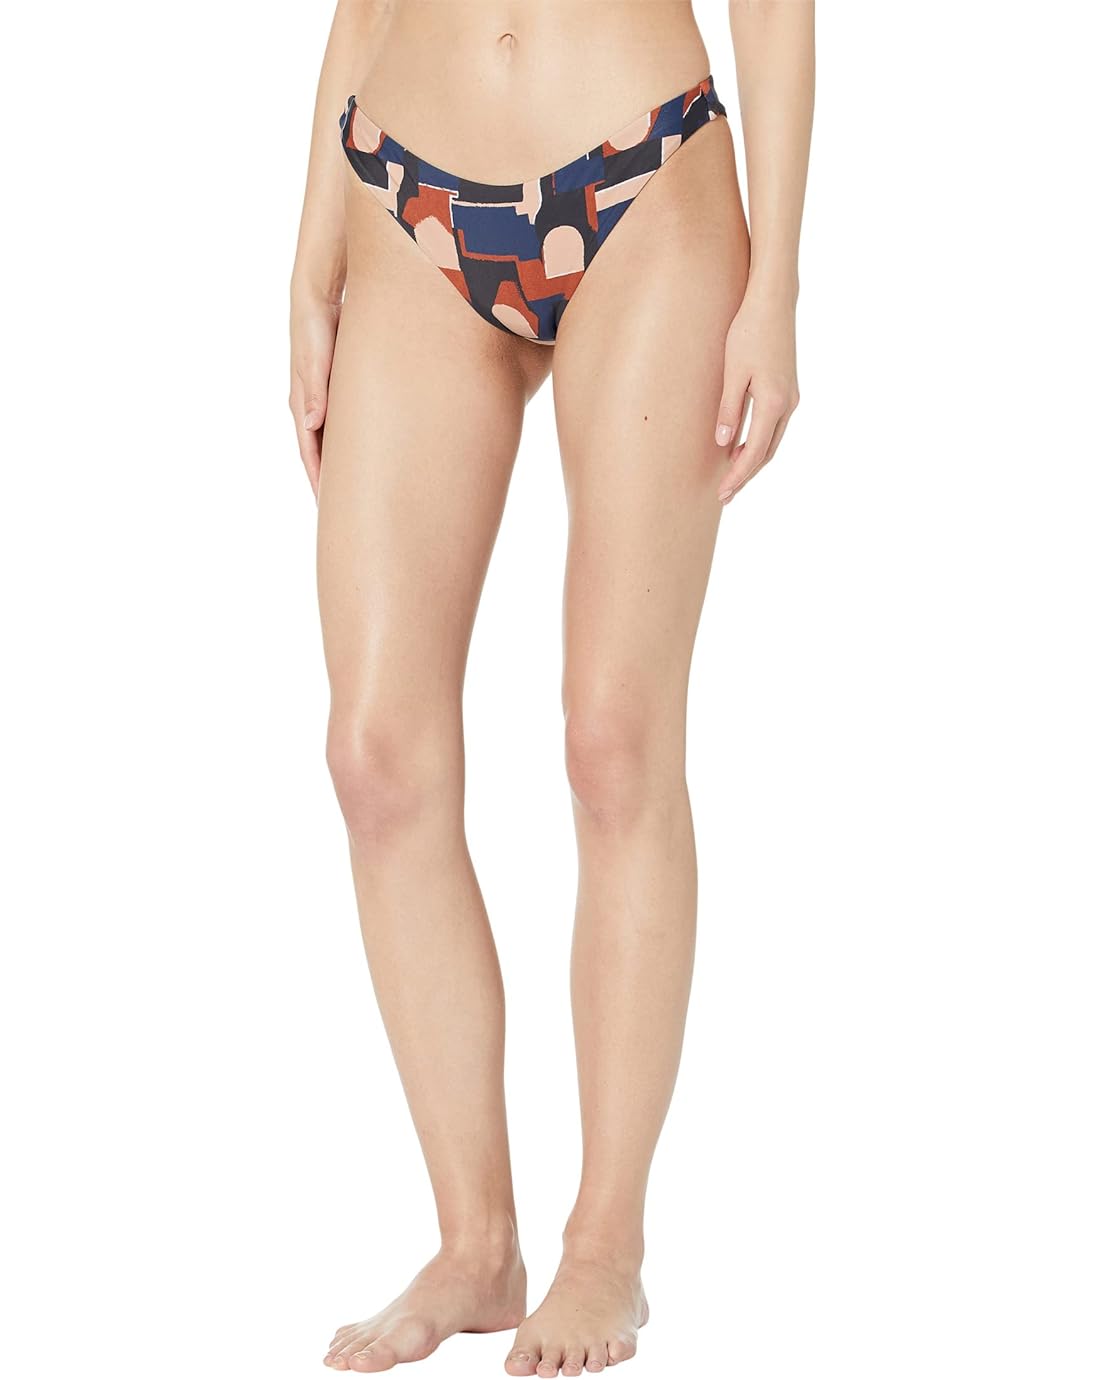 Madewell Madewell Second Wave Classic Cheeky Bikini Bottom in Color Collage